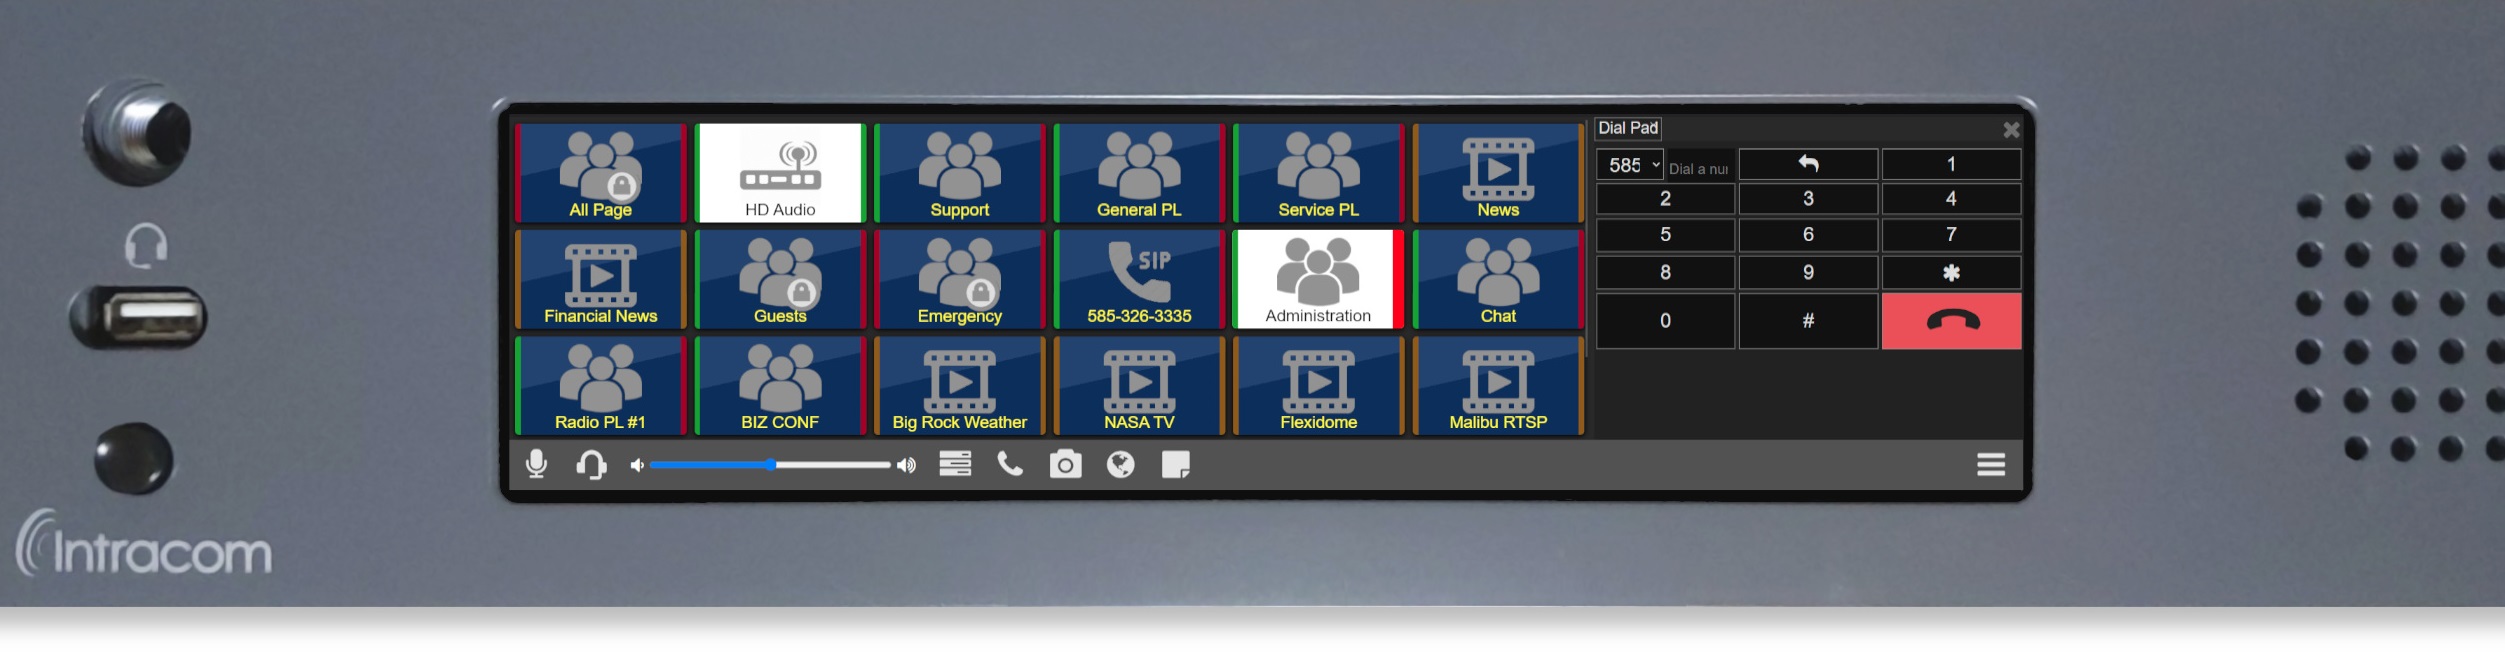 VCOM Rackmount Control Panel showing contacts and dialpad